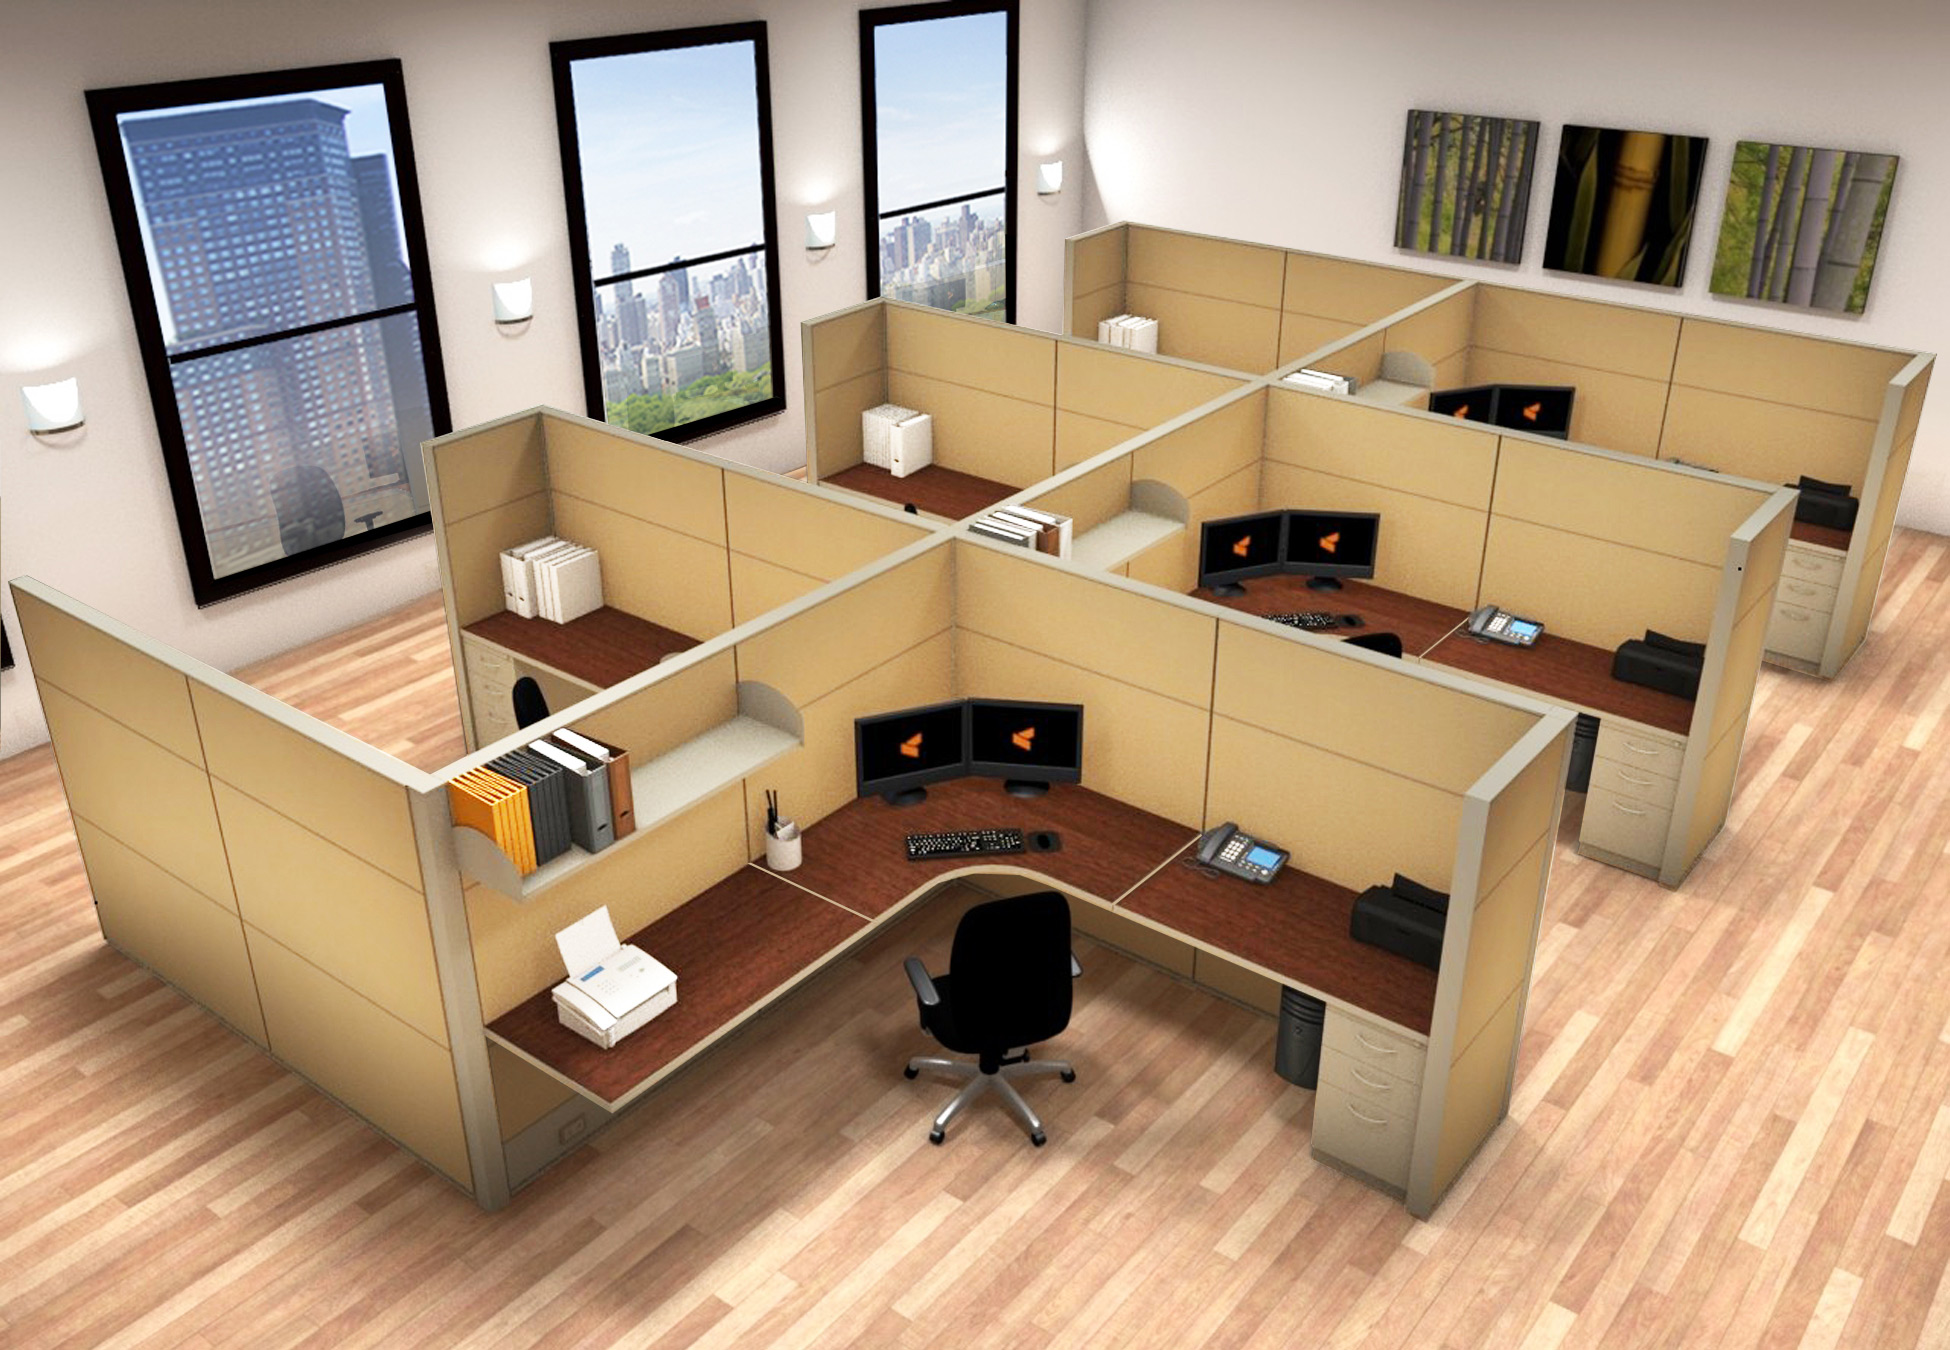 8x8 Cubicle Workstations from AIS - 6 Pack Cluster